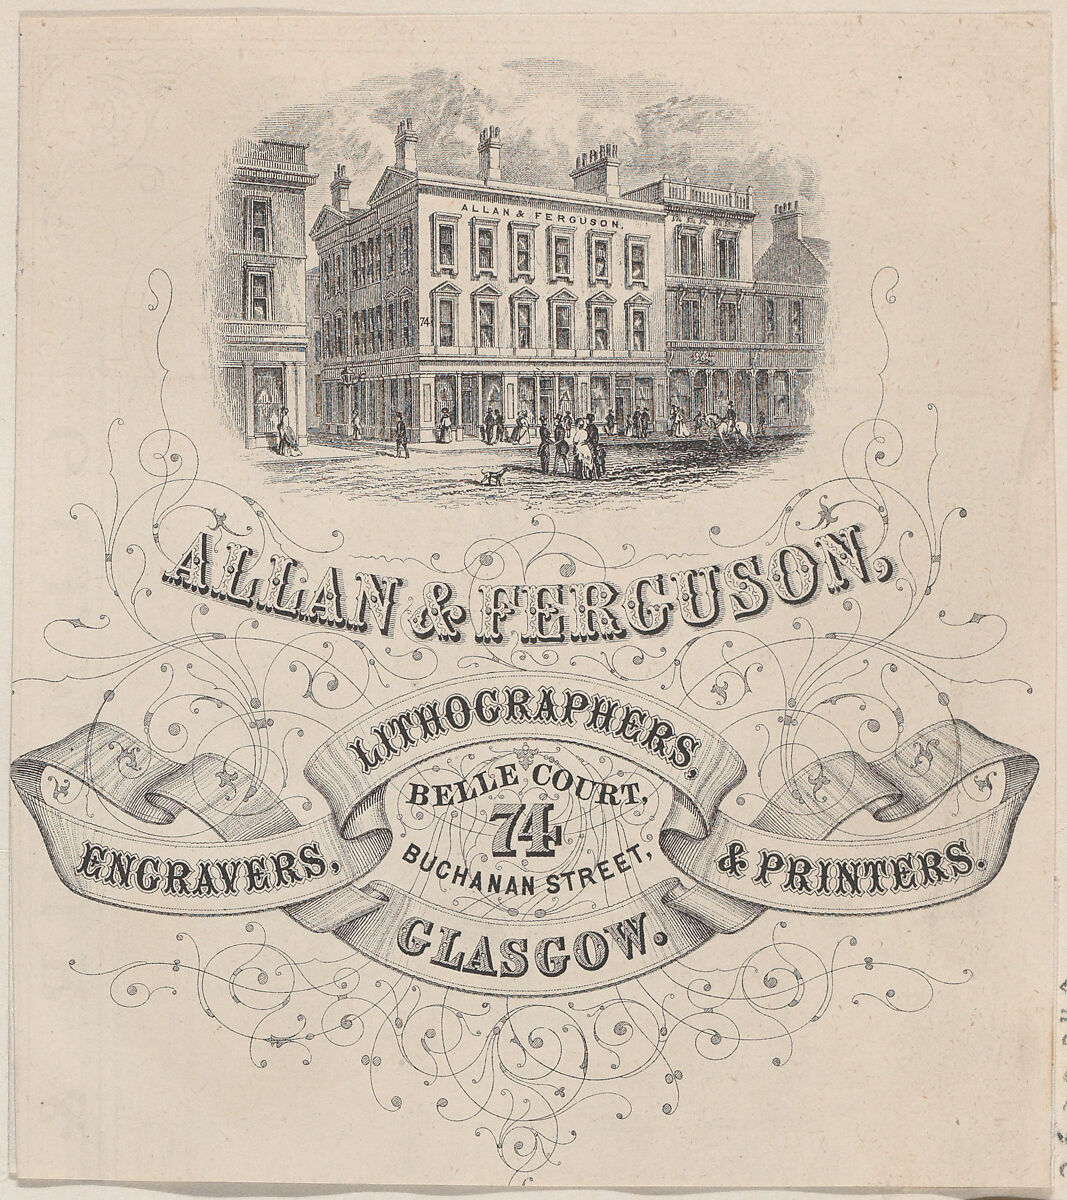 Trade Card for Allan & Ferguson, Engravers, Lithographers & Printers, Anonymous, British, 19th century, Commercial Lithograph 